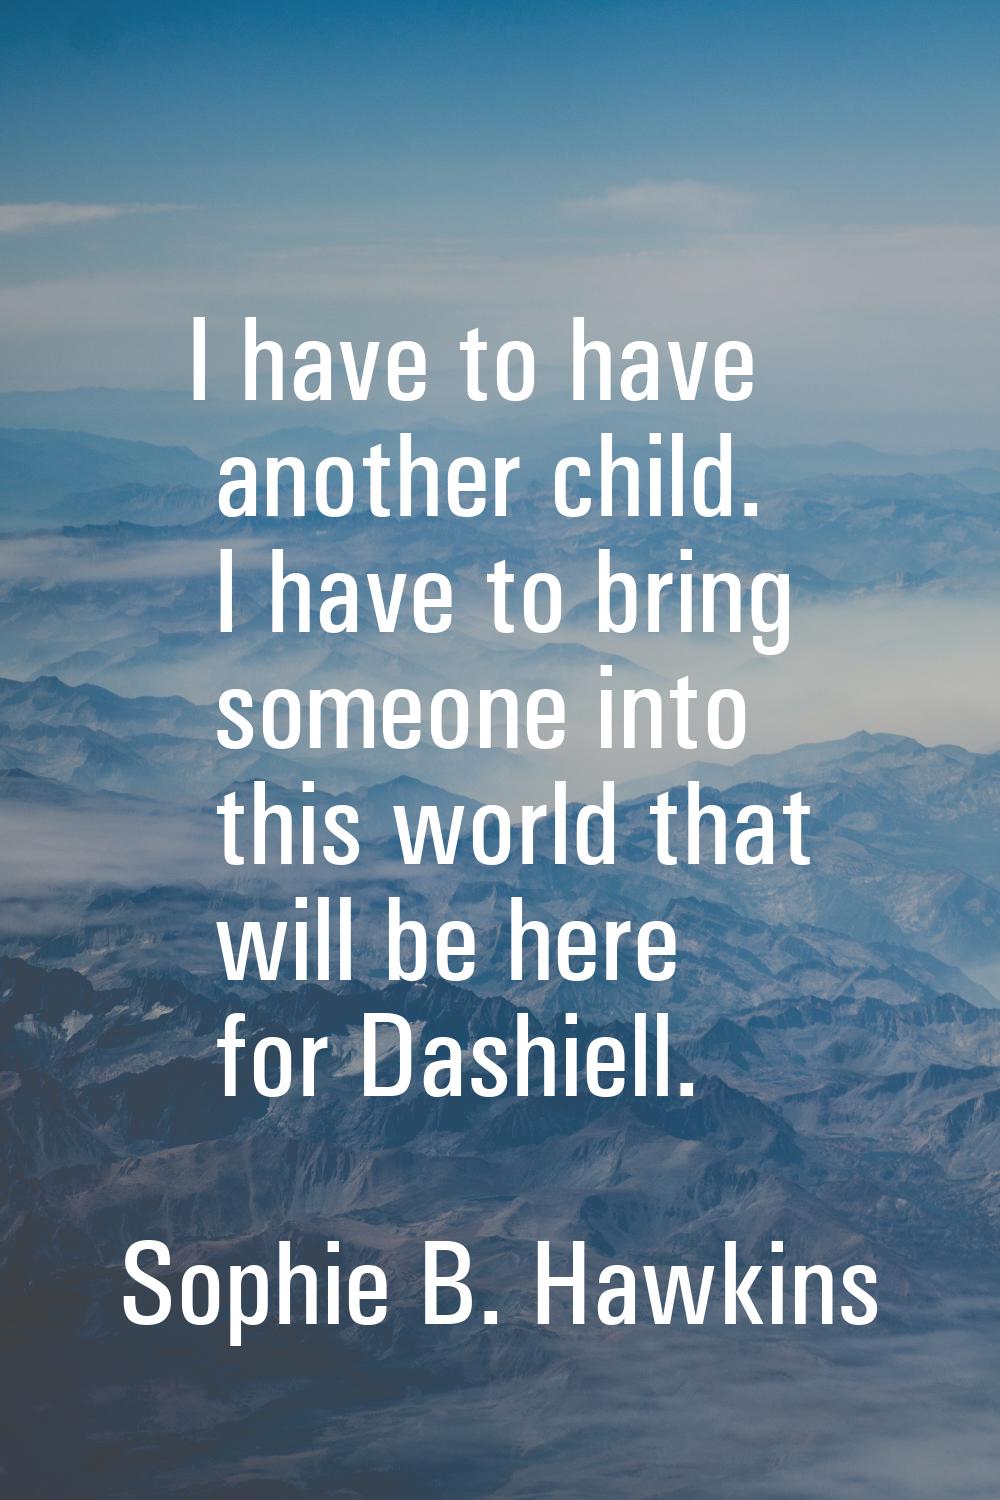 I have to have another child. I have to bring someone into this world that will be here for Dashiel